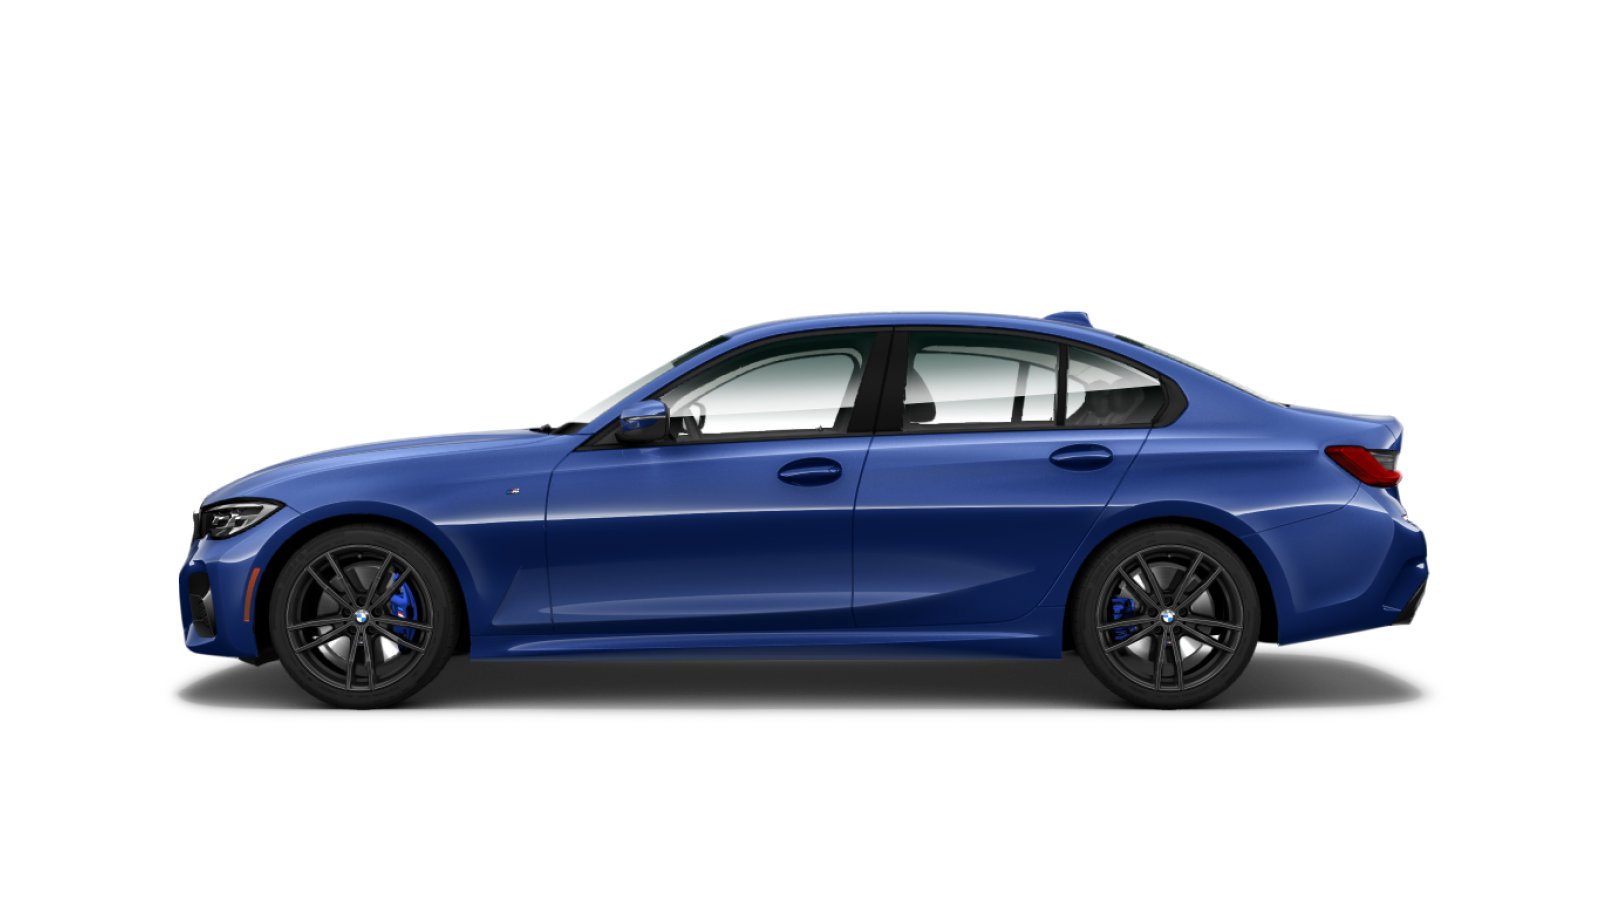 BMW 3 Series 2019 PNG Pic Background